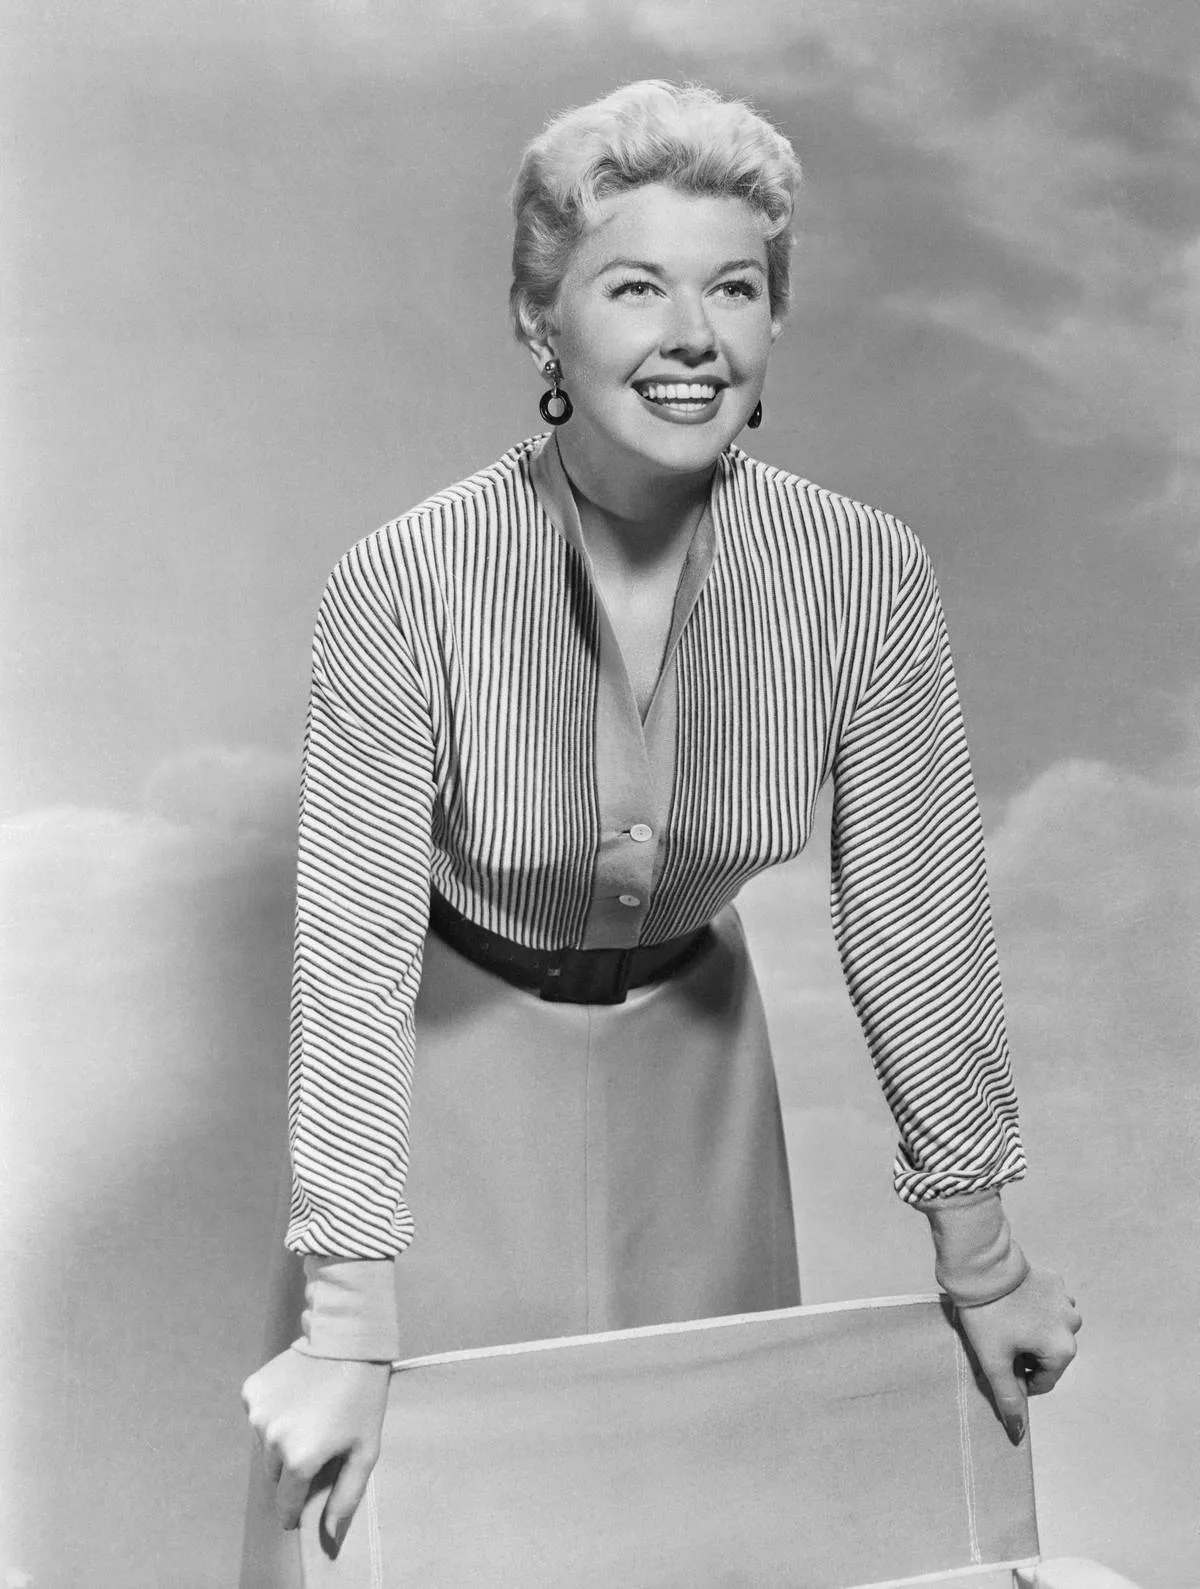 Doris Day poses for a photo.